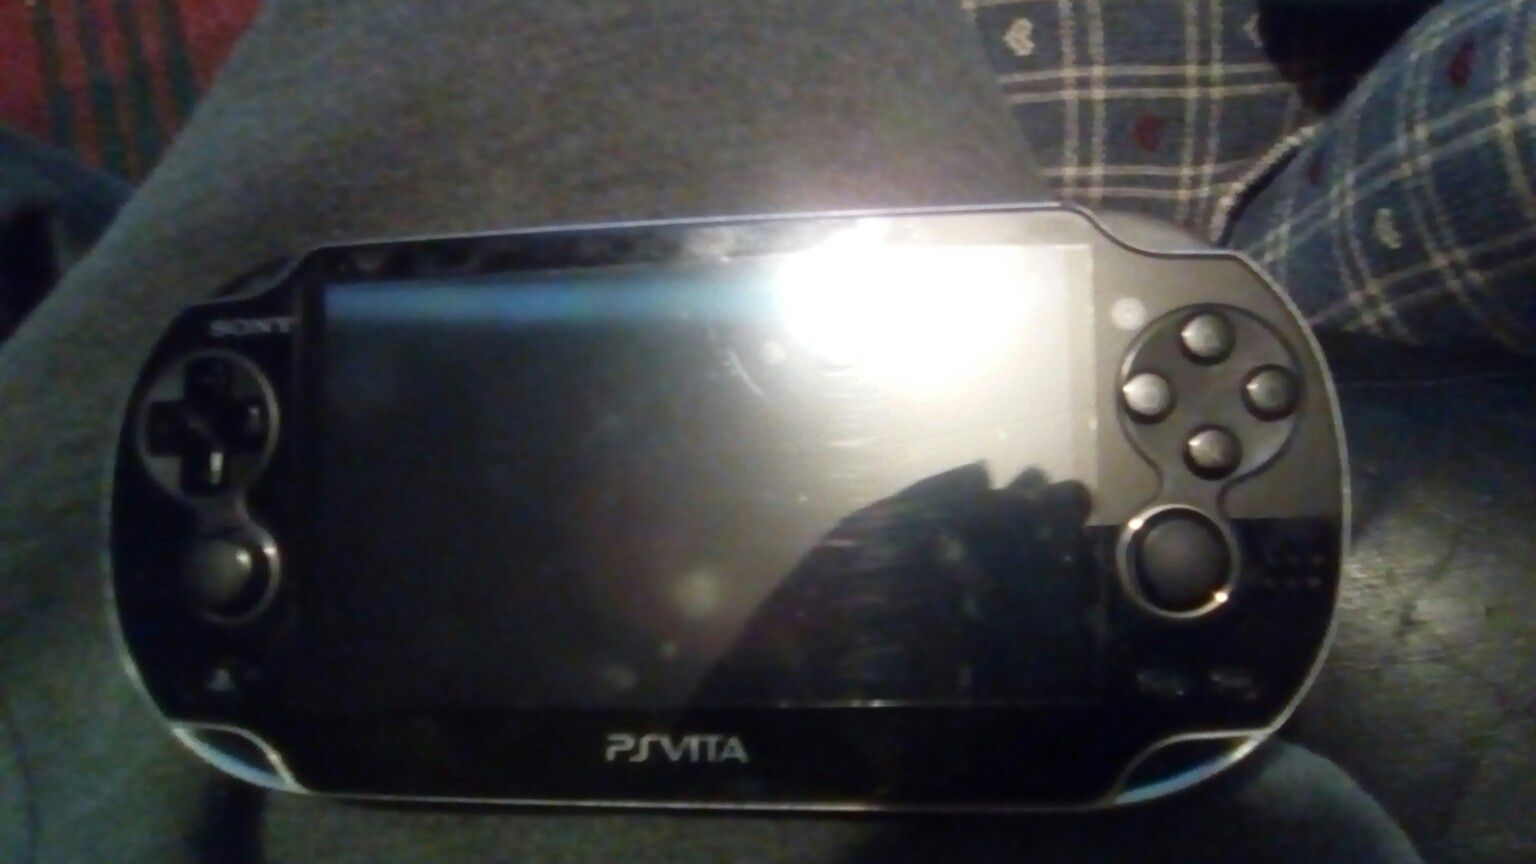 PS Vita,Games,etc. Only sell locally within 60 miles from me